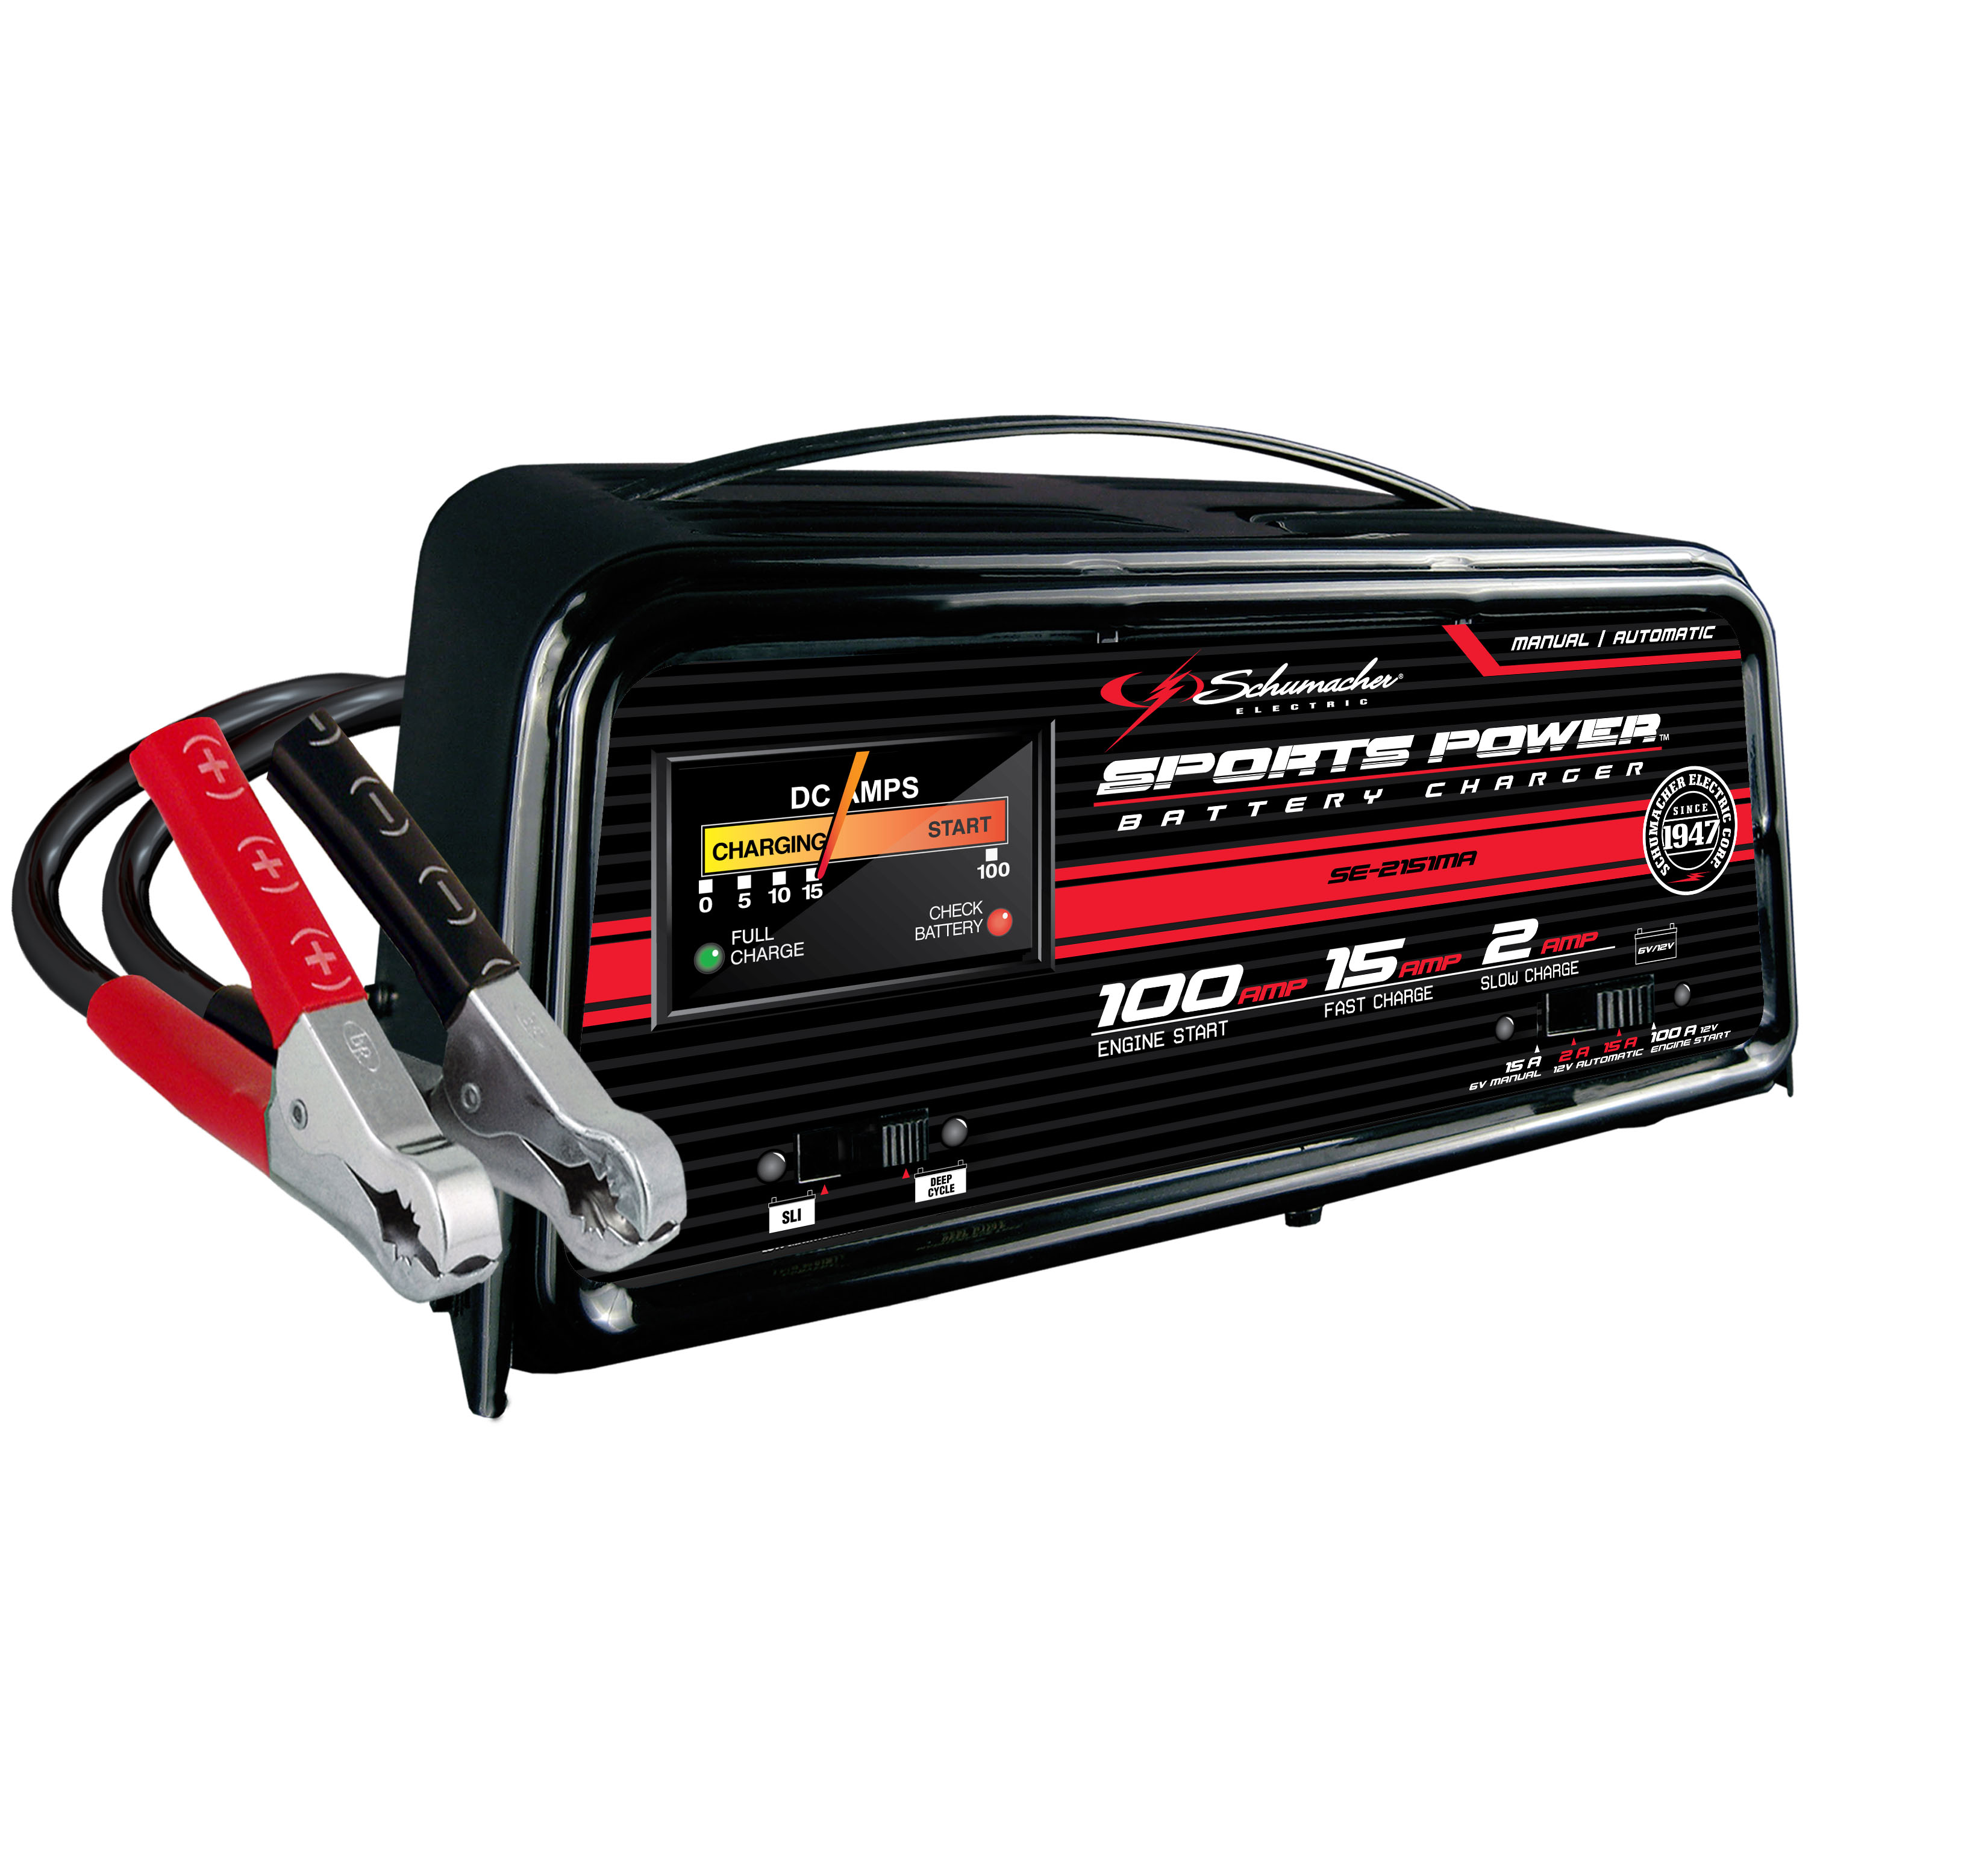 mh-26 battery charger manual